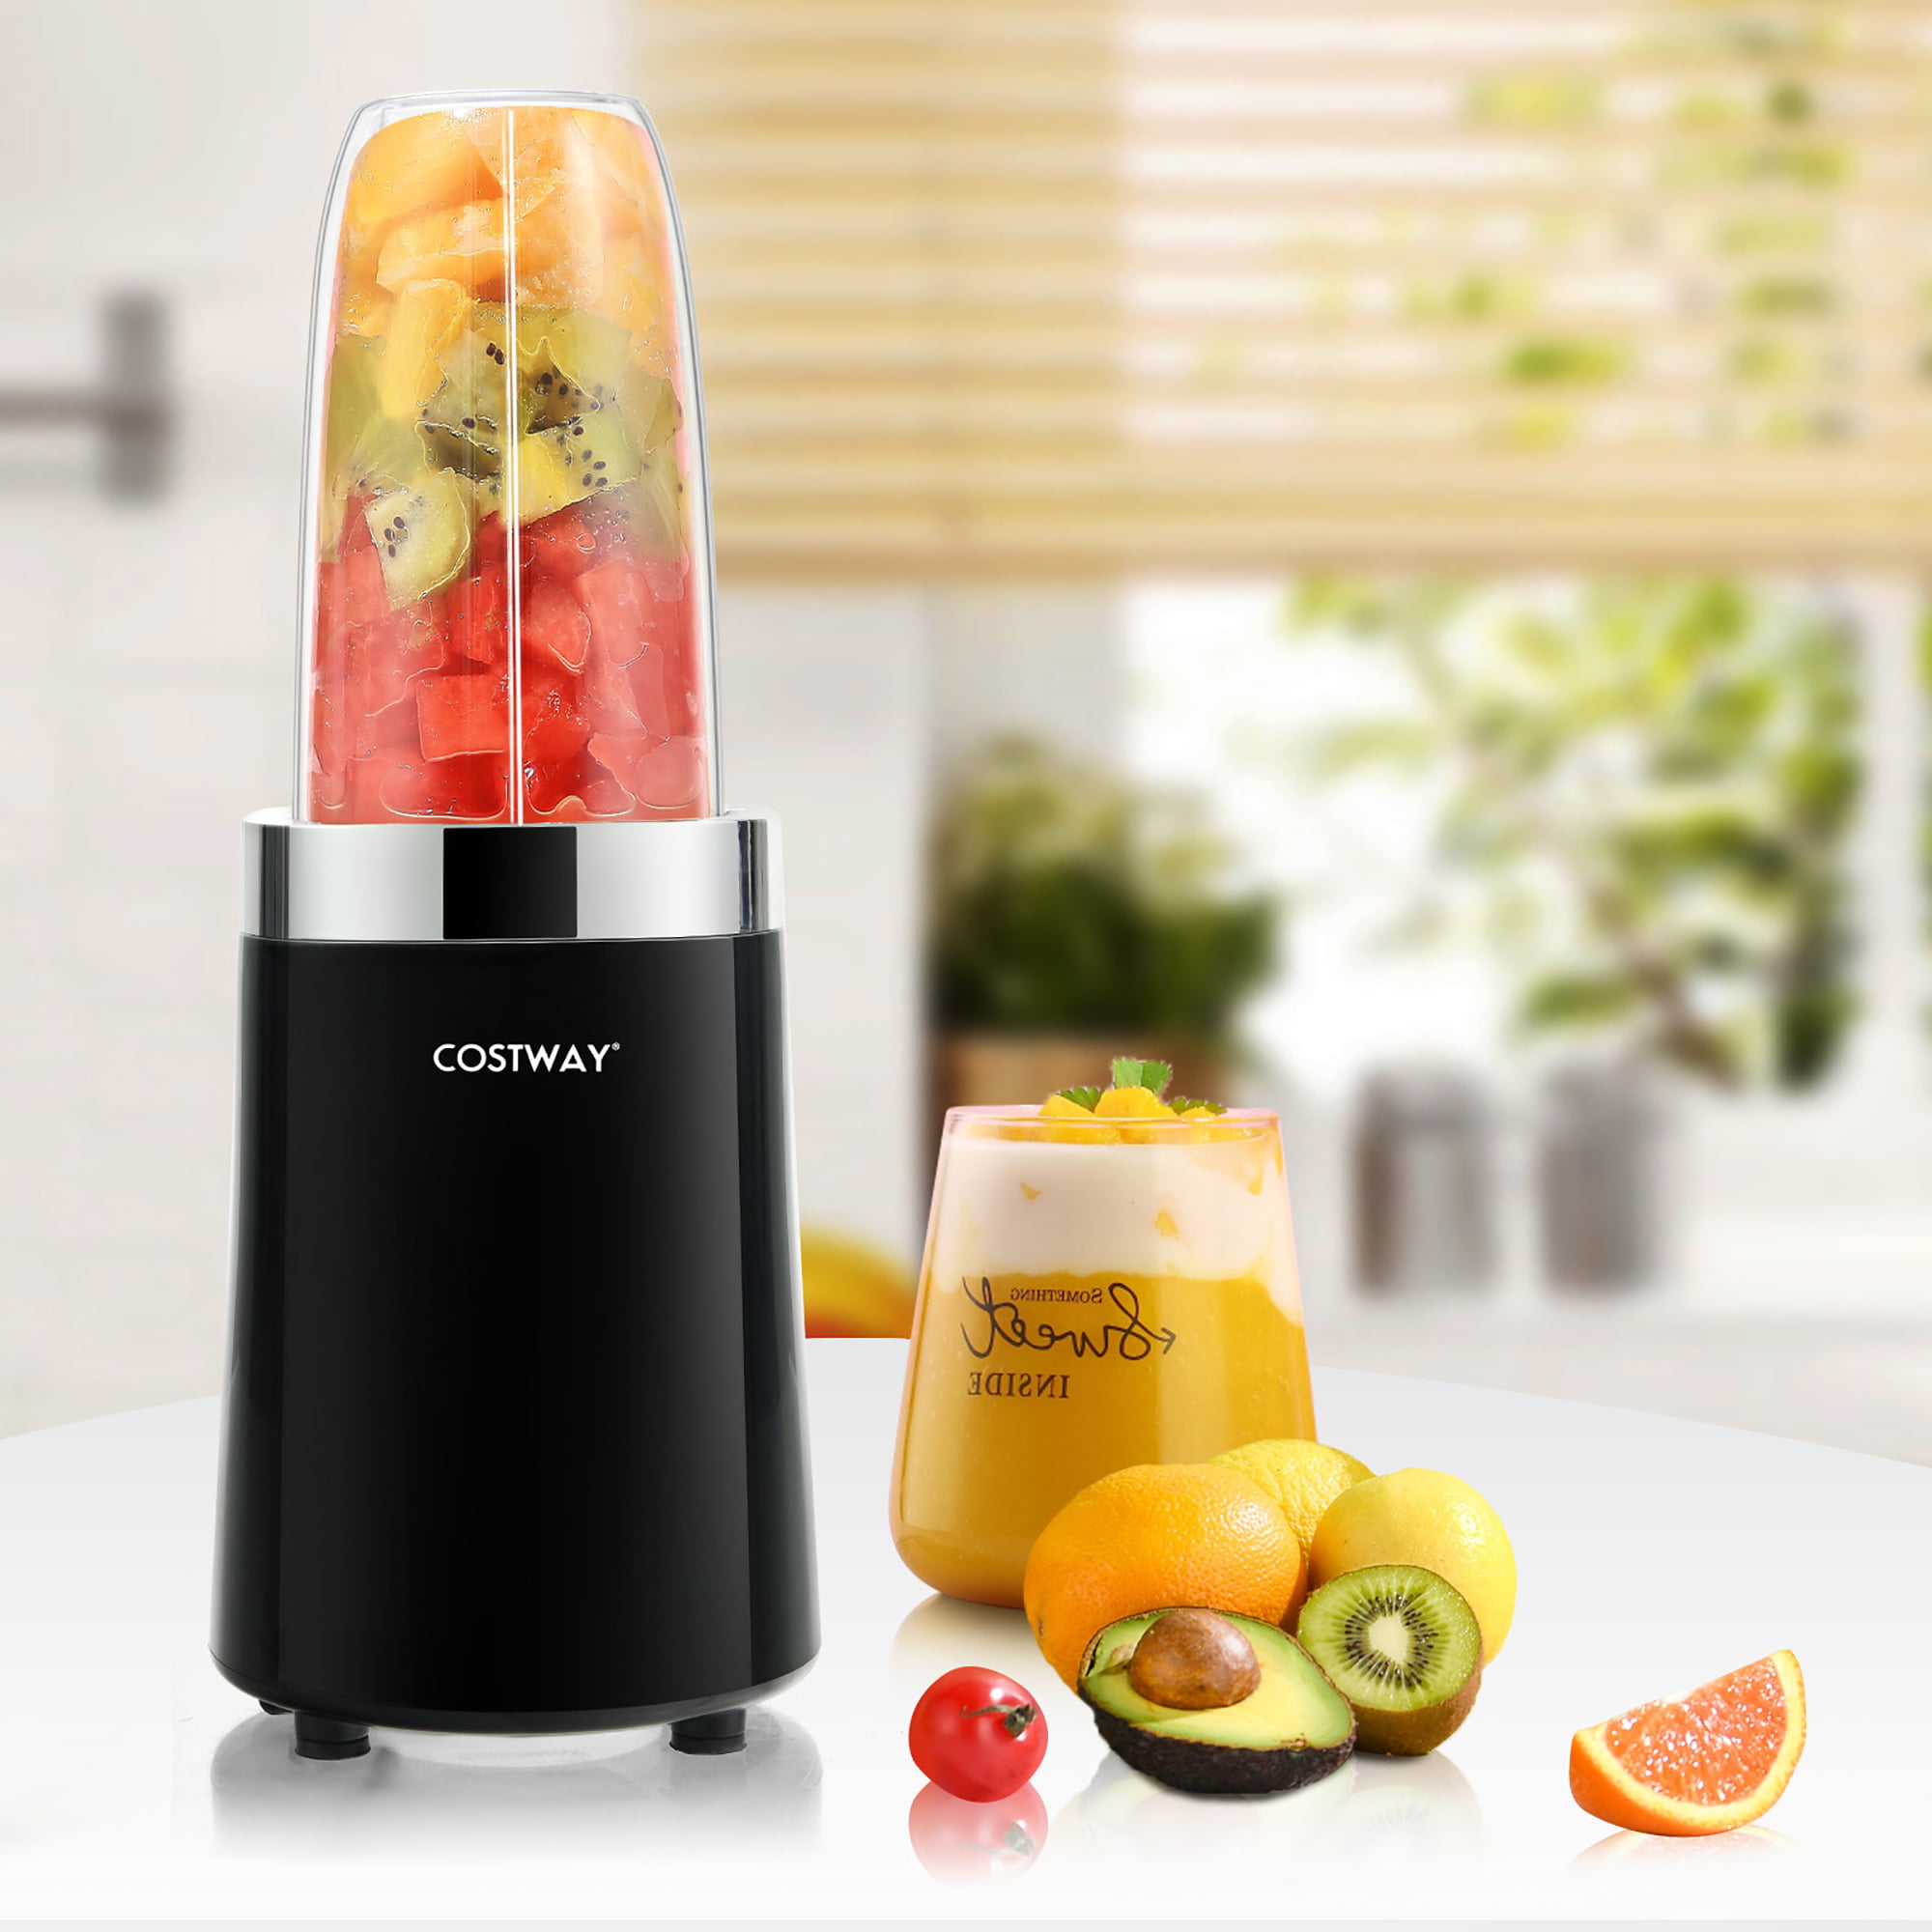 VEWIOR 900W Blender for Shakes and Smoothies, 12 Pieces Personal Blenders for Kitchen with 6 Fins Blender Blade, Smoothie BLE